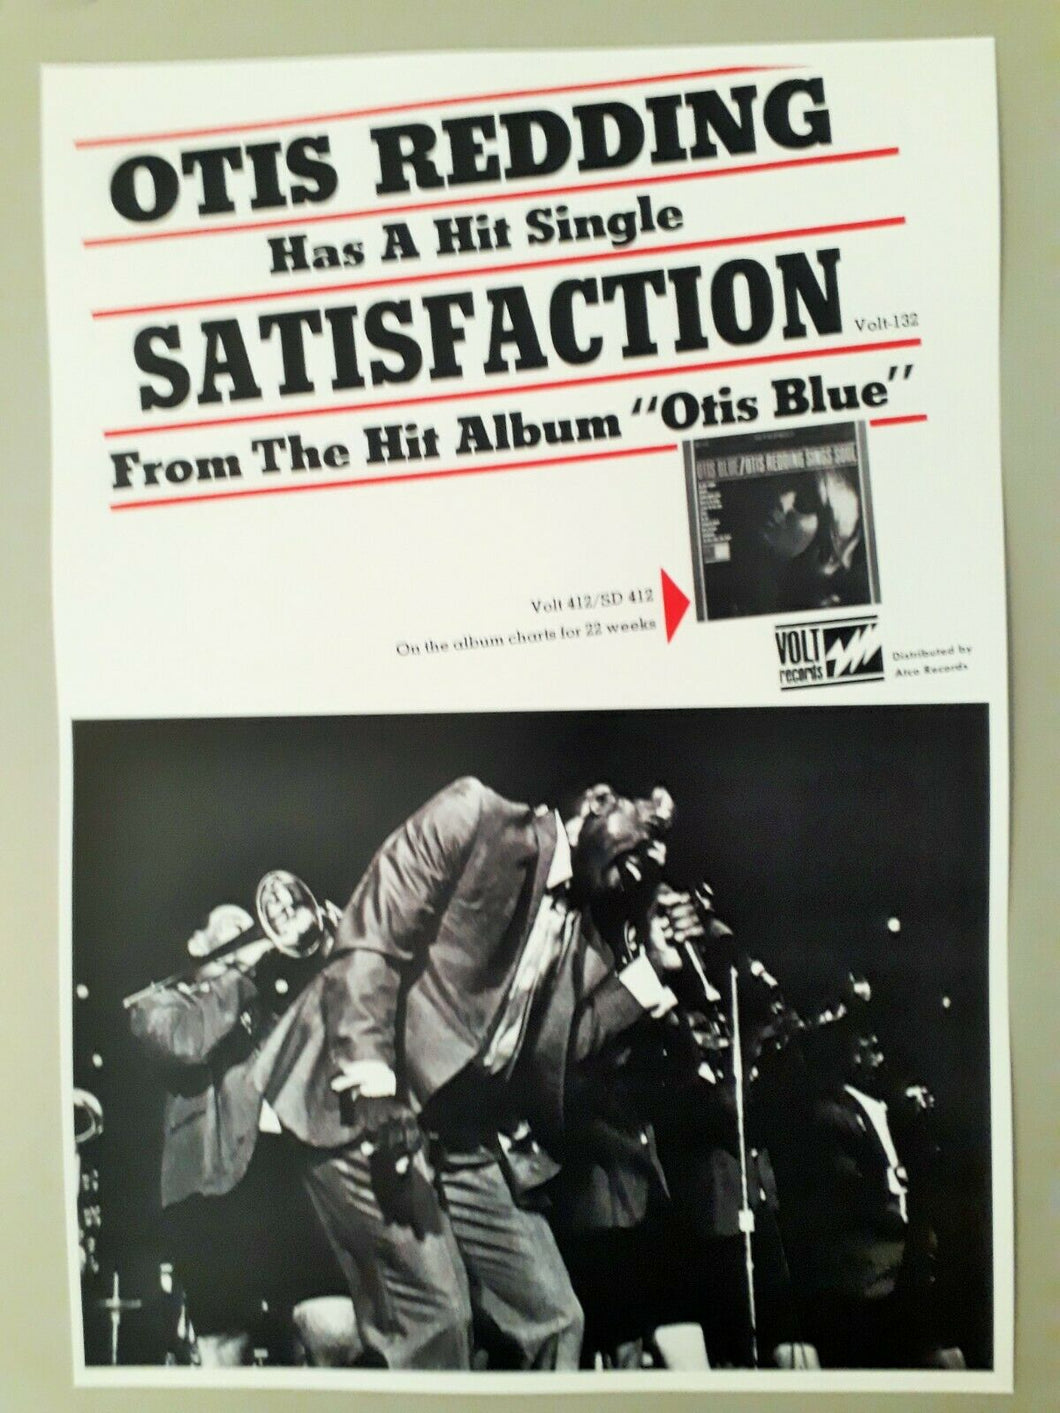 Otis Redding promo poster - Satisfaction 1966 Otis Blue new reprinted edition - Original Music and Movie Posters for sale from Bamalama - Online Poster Store UK London